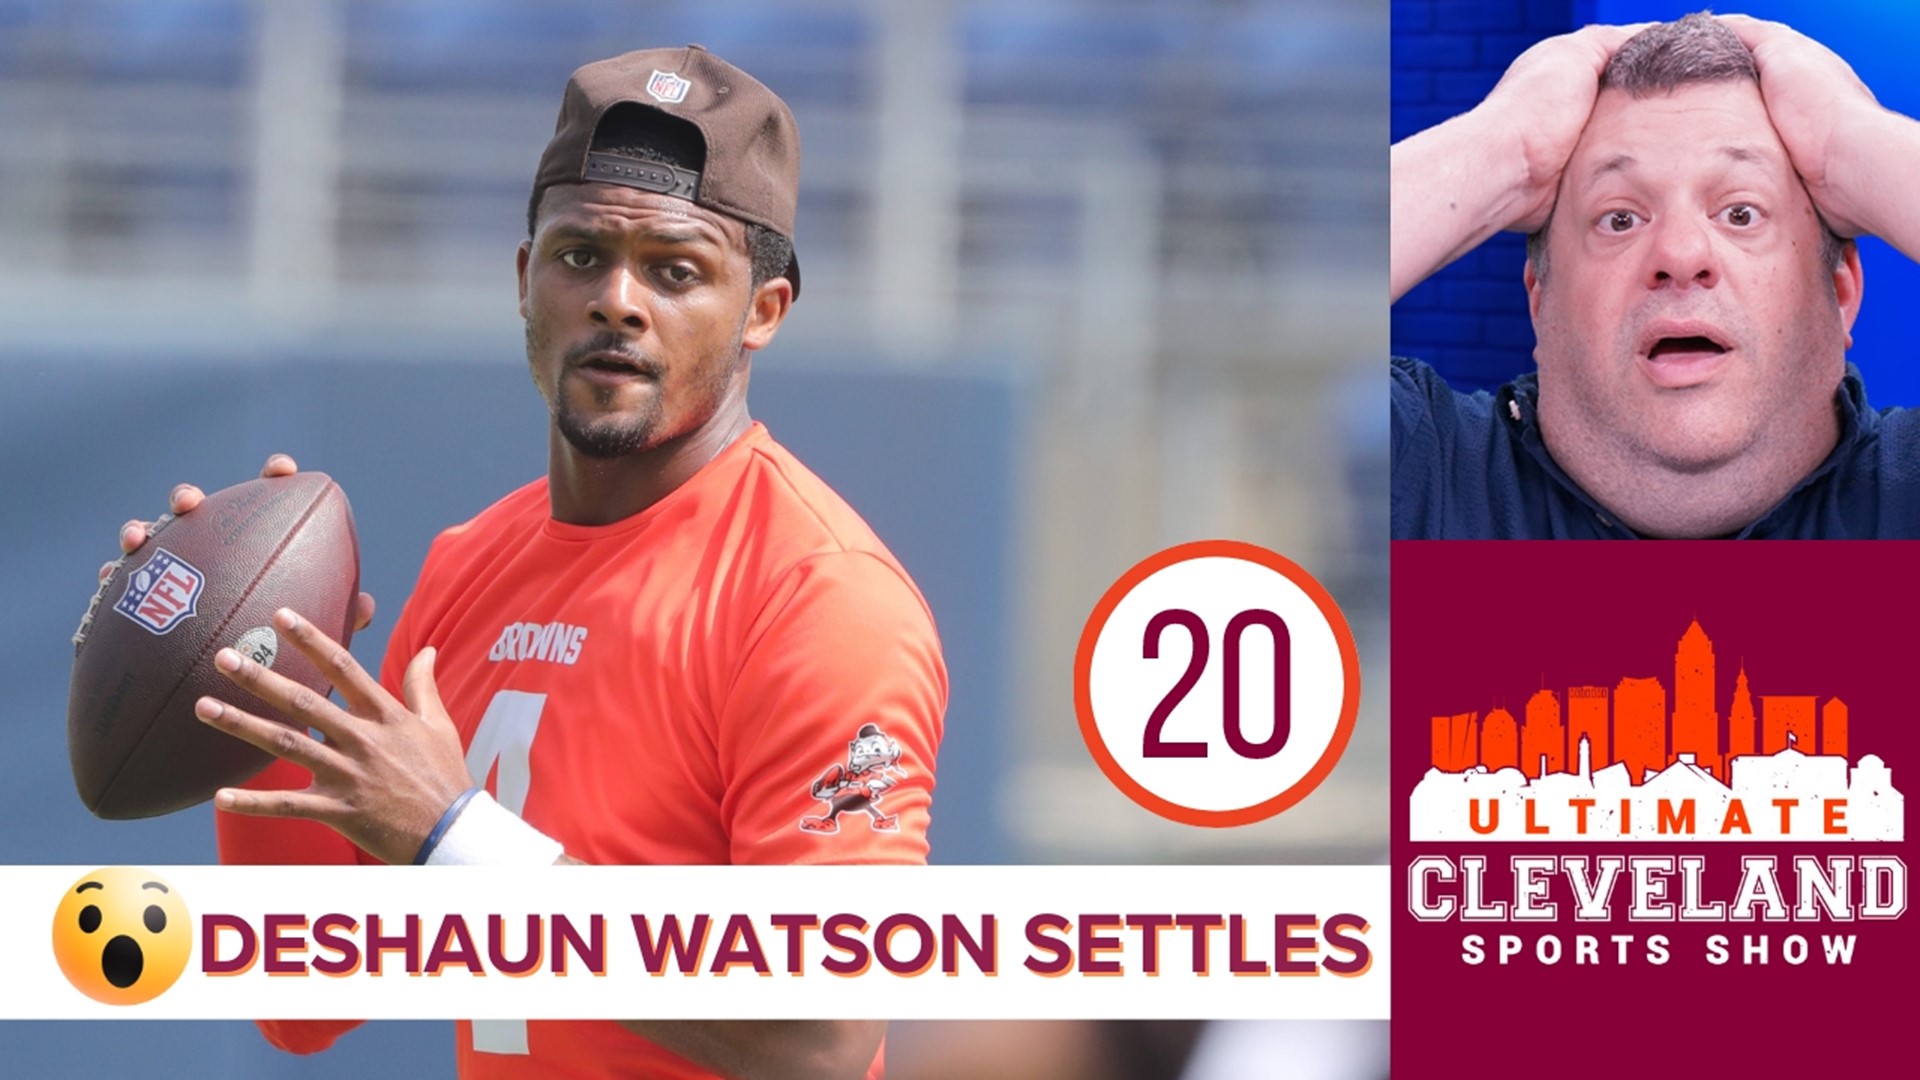 The guys react to the Deshaun Watson breaking news about all but 4 lawsuits being settled per Tony Buzbee.